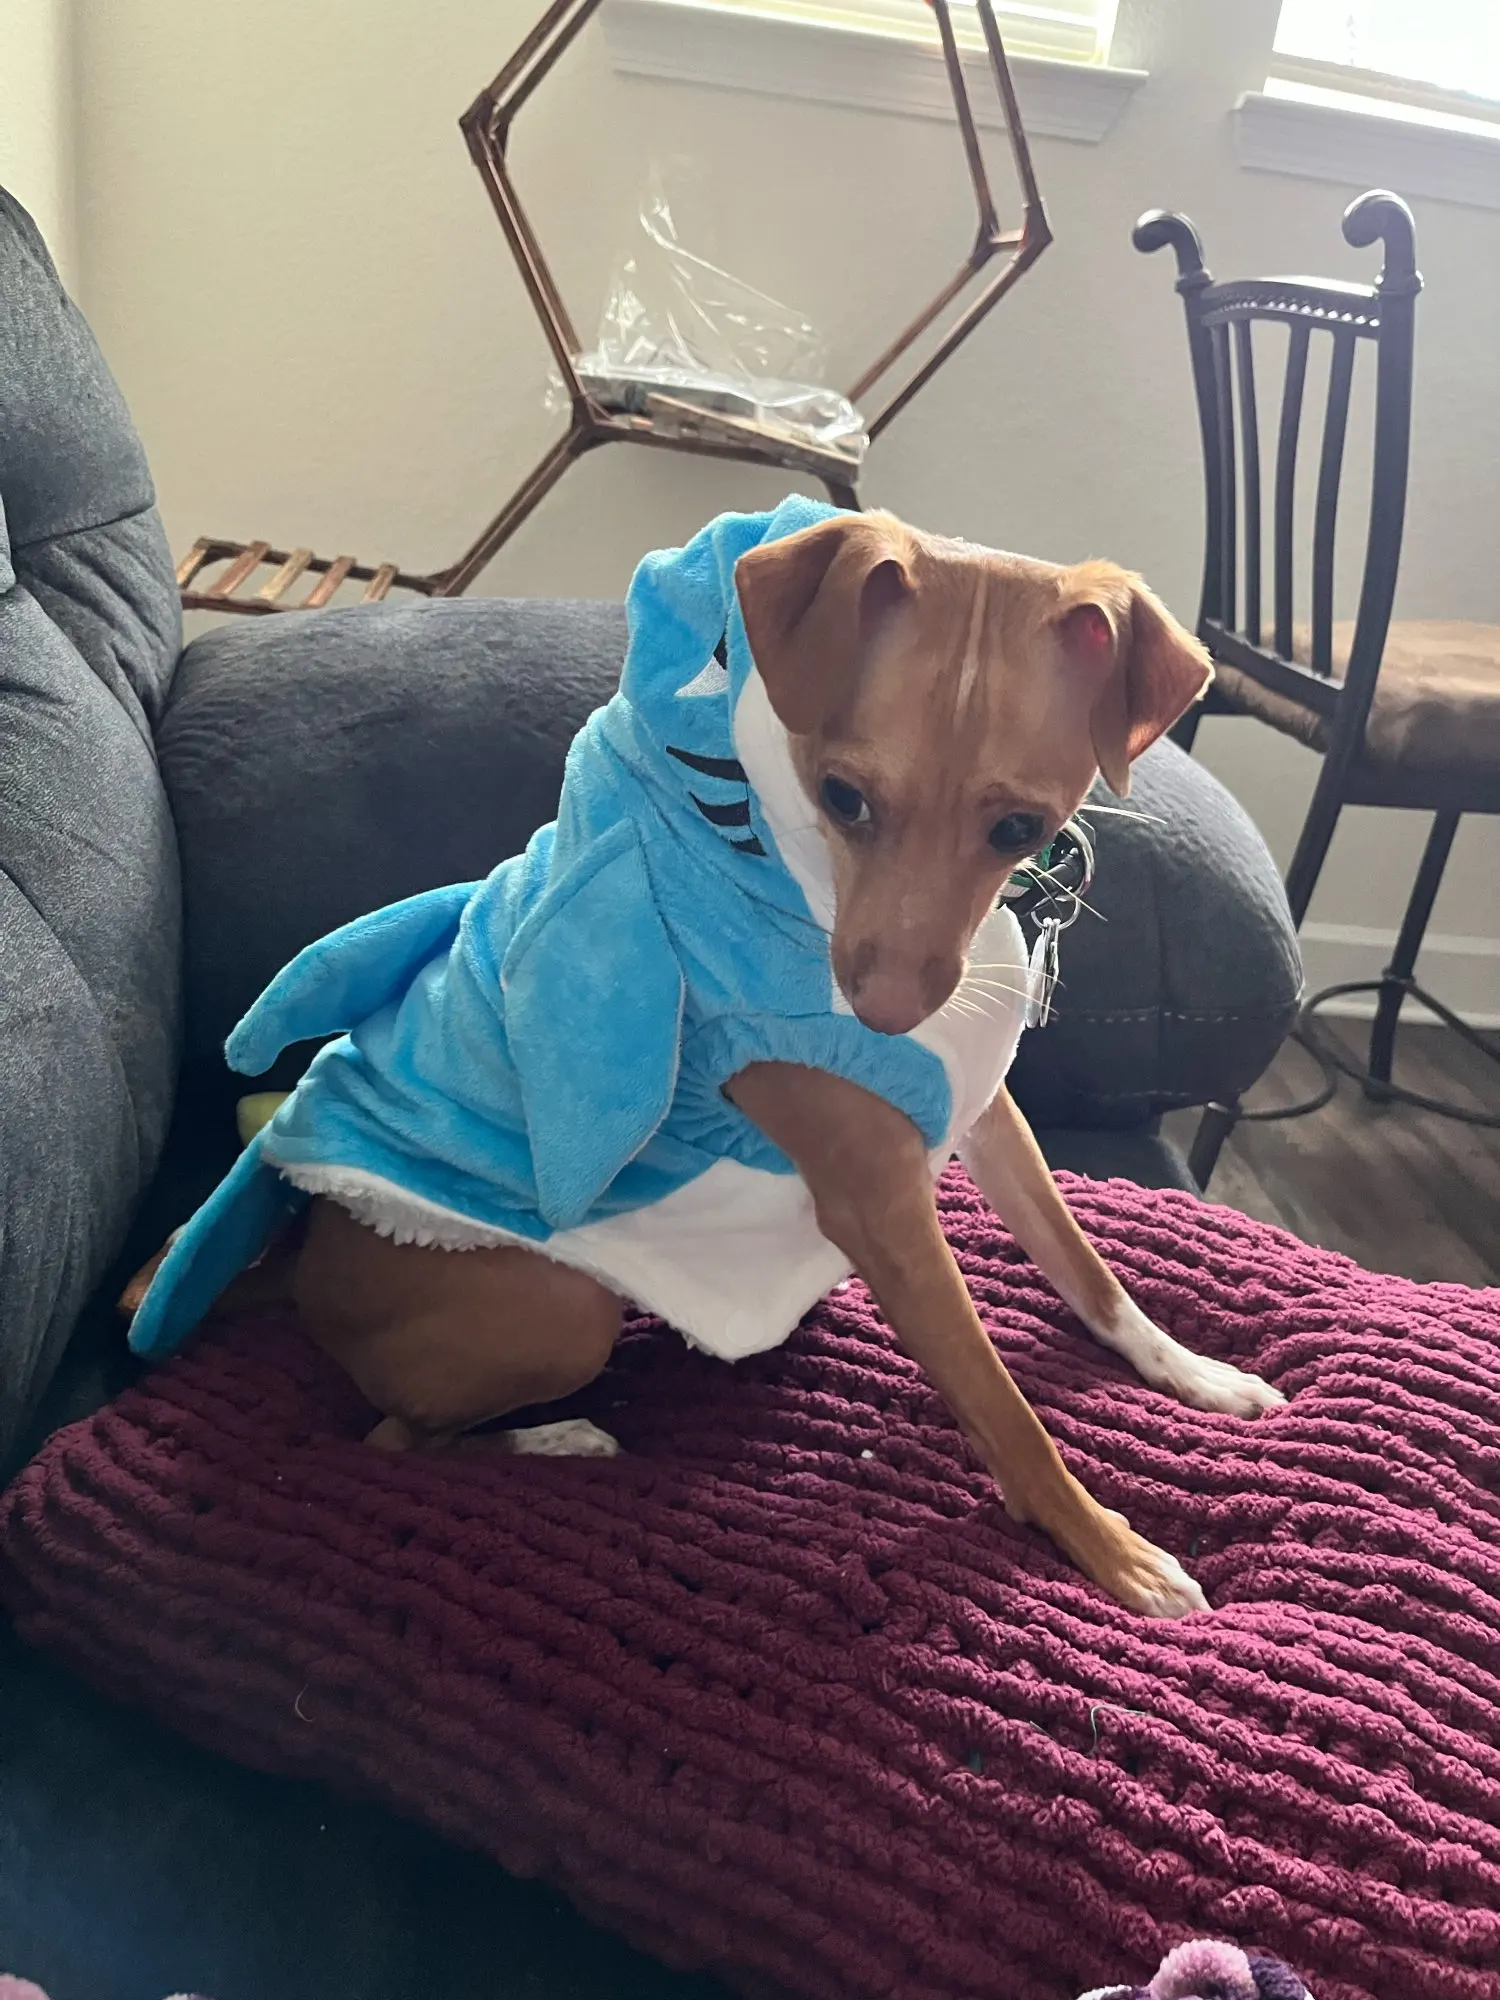 Shark Coat For Dog - Aggressive Or Cute? photo review